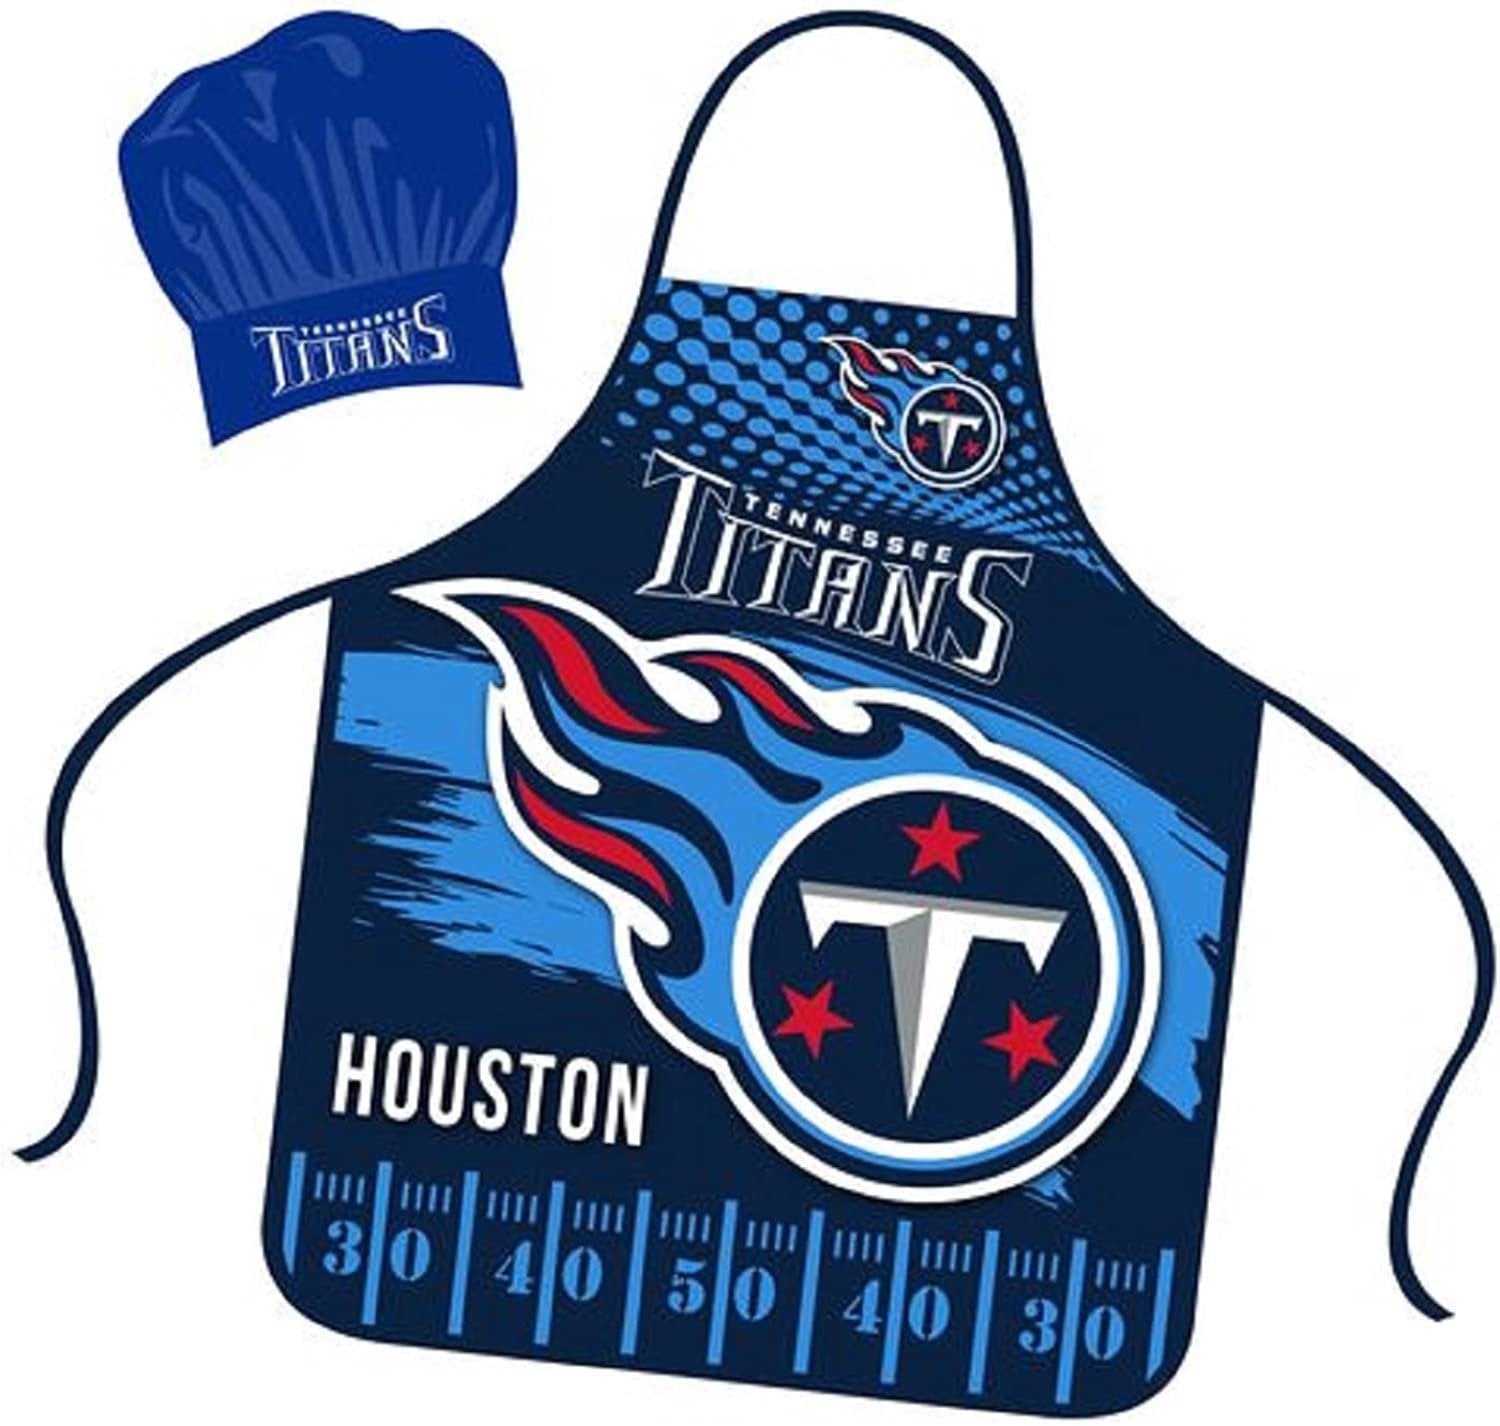 Tennessee Titans Apron Chef Hat Set Full Color Universal Size Tie Back Grilling Tailgate BBQ Cooking Host